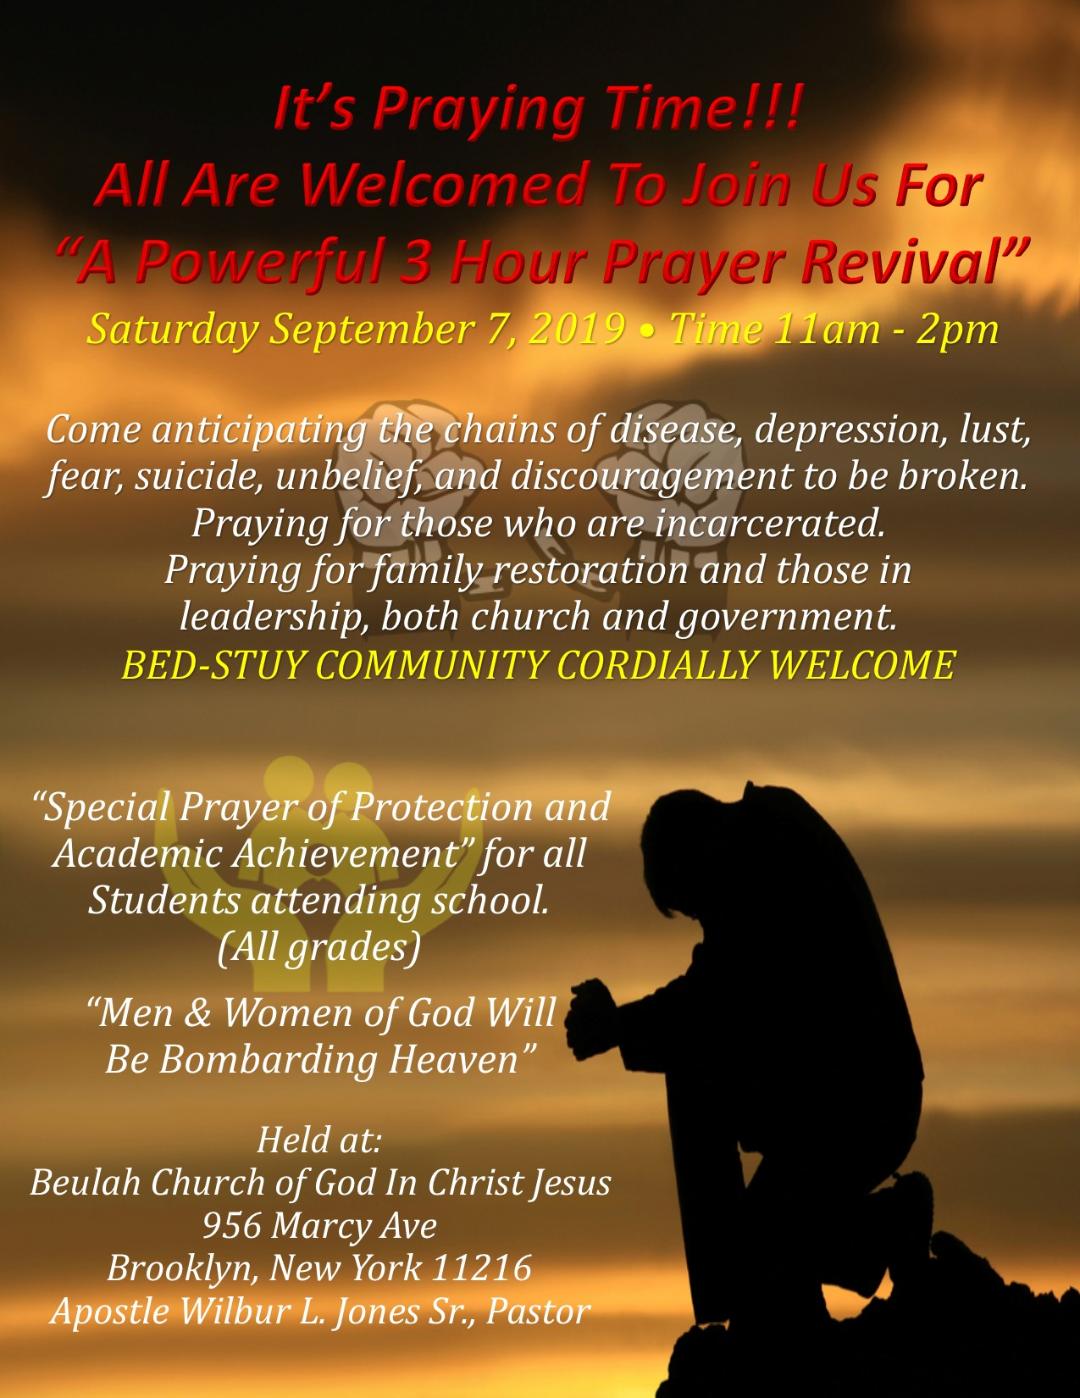 Prayer Revival 2019 & Back To School Giveaway at Beulah Marcy Avenue @ Beulah Church of God in Christ Jesus